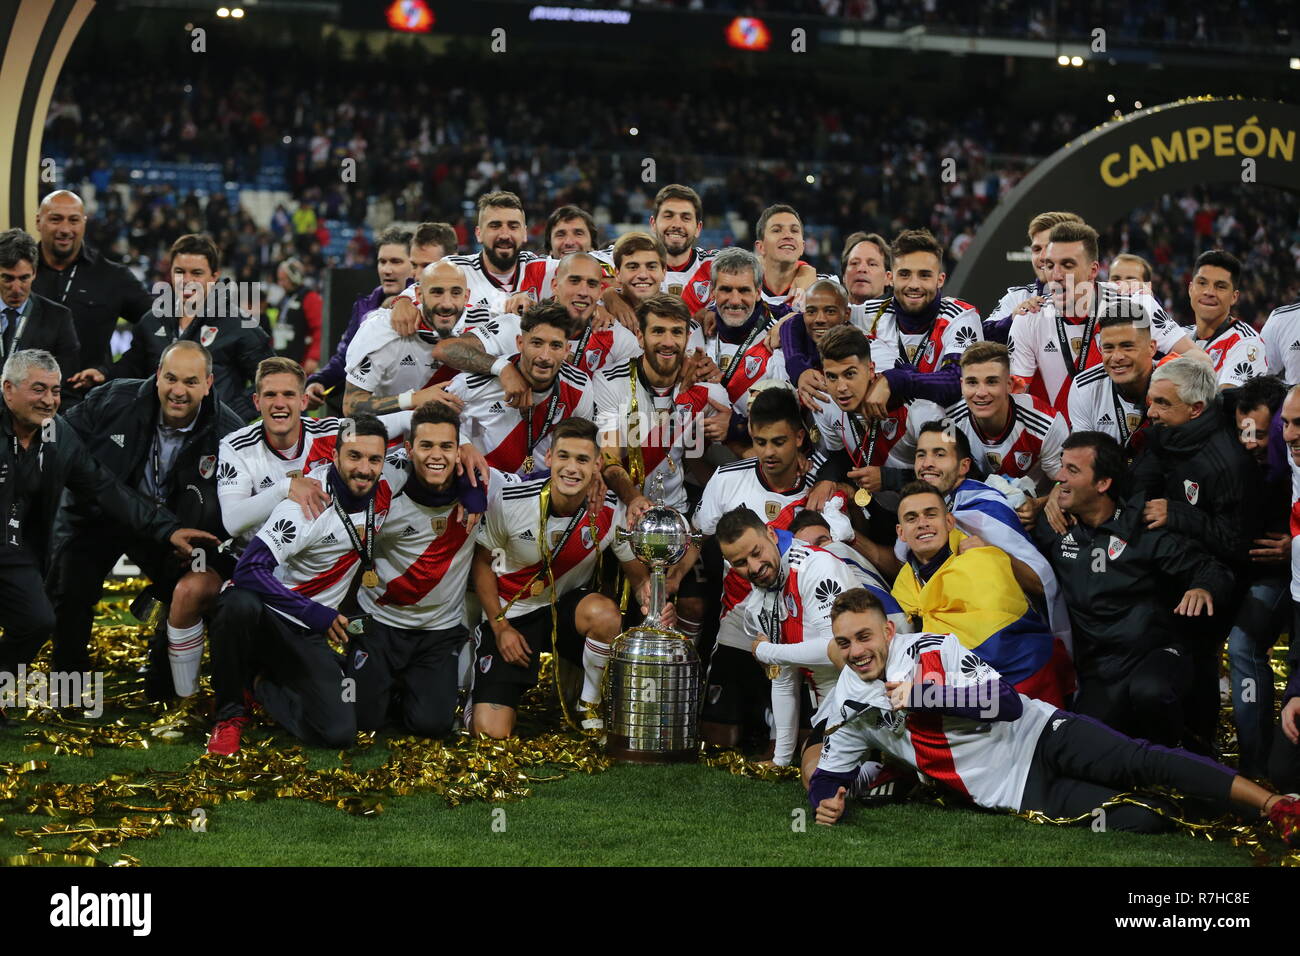 Madrid, Spain. 09th Dec, 2018. Football: Copa Libertadores, Final, River Plate - Boca Juniors in the Santiago Bernabeu stadium. The players of River Plate cheer after winning the game with the trophy. Credit: Cezaro de Luca/dpa/Alamy Live News Stock Photo